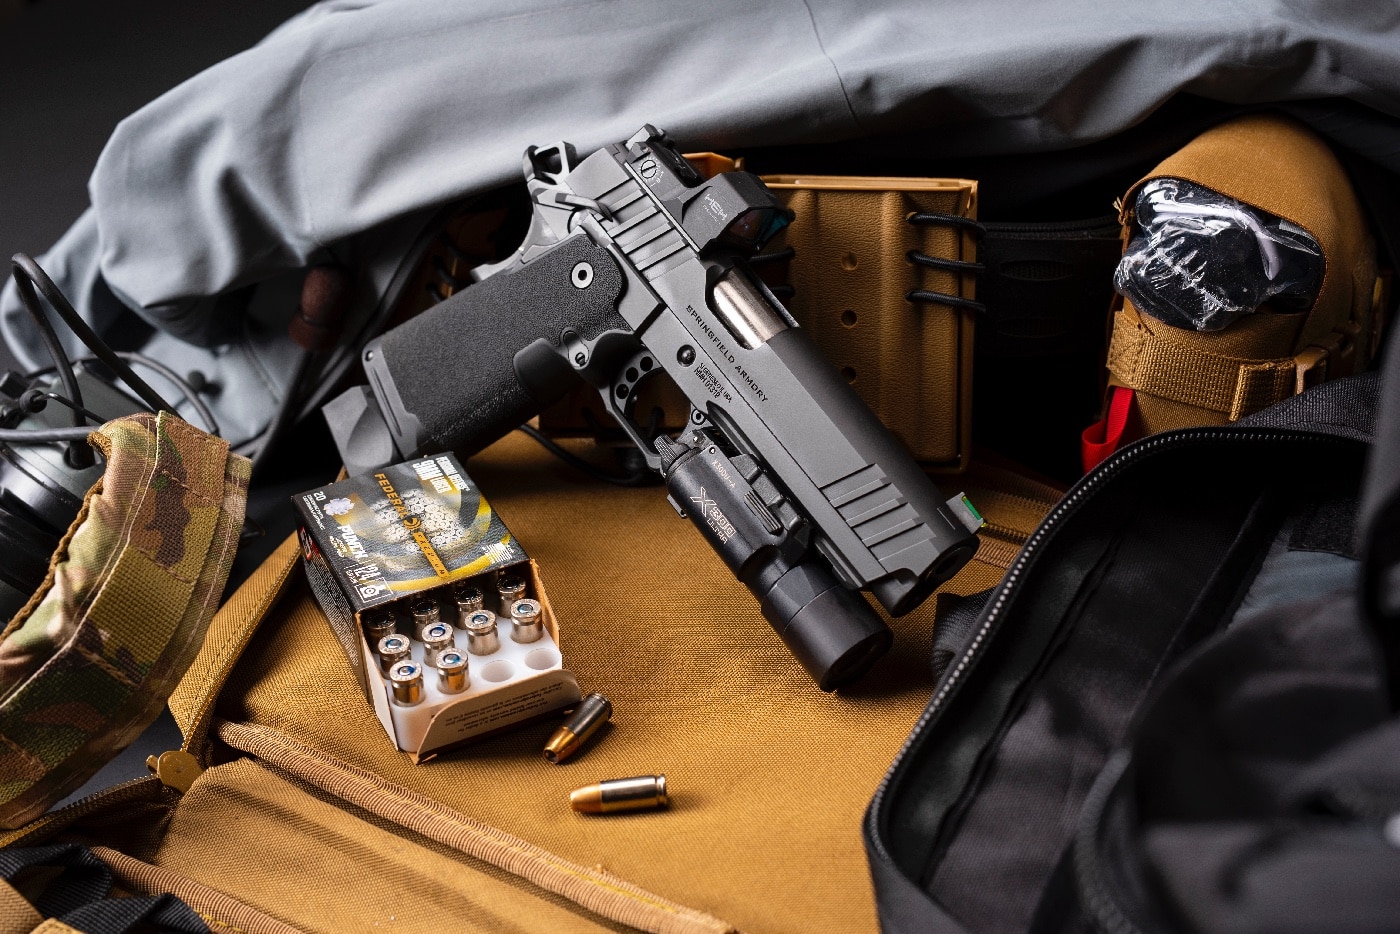 Shown in this digital image, a Springfield Armory Prodigy is shown with Federal Punch 9mm ammo.